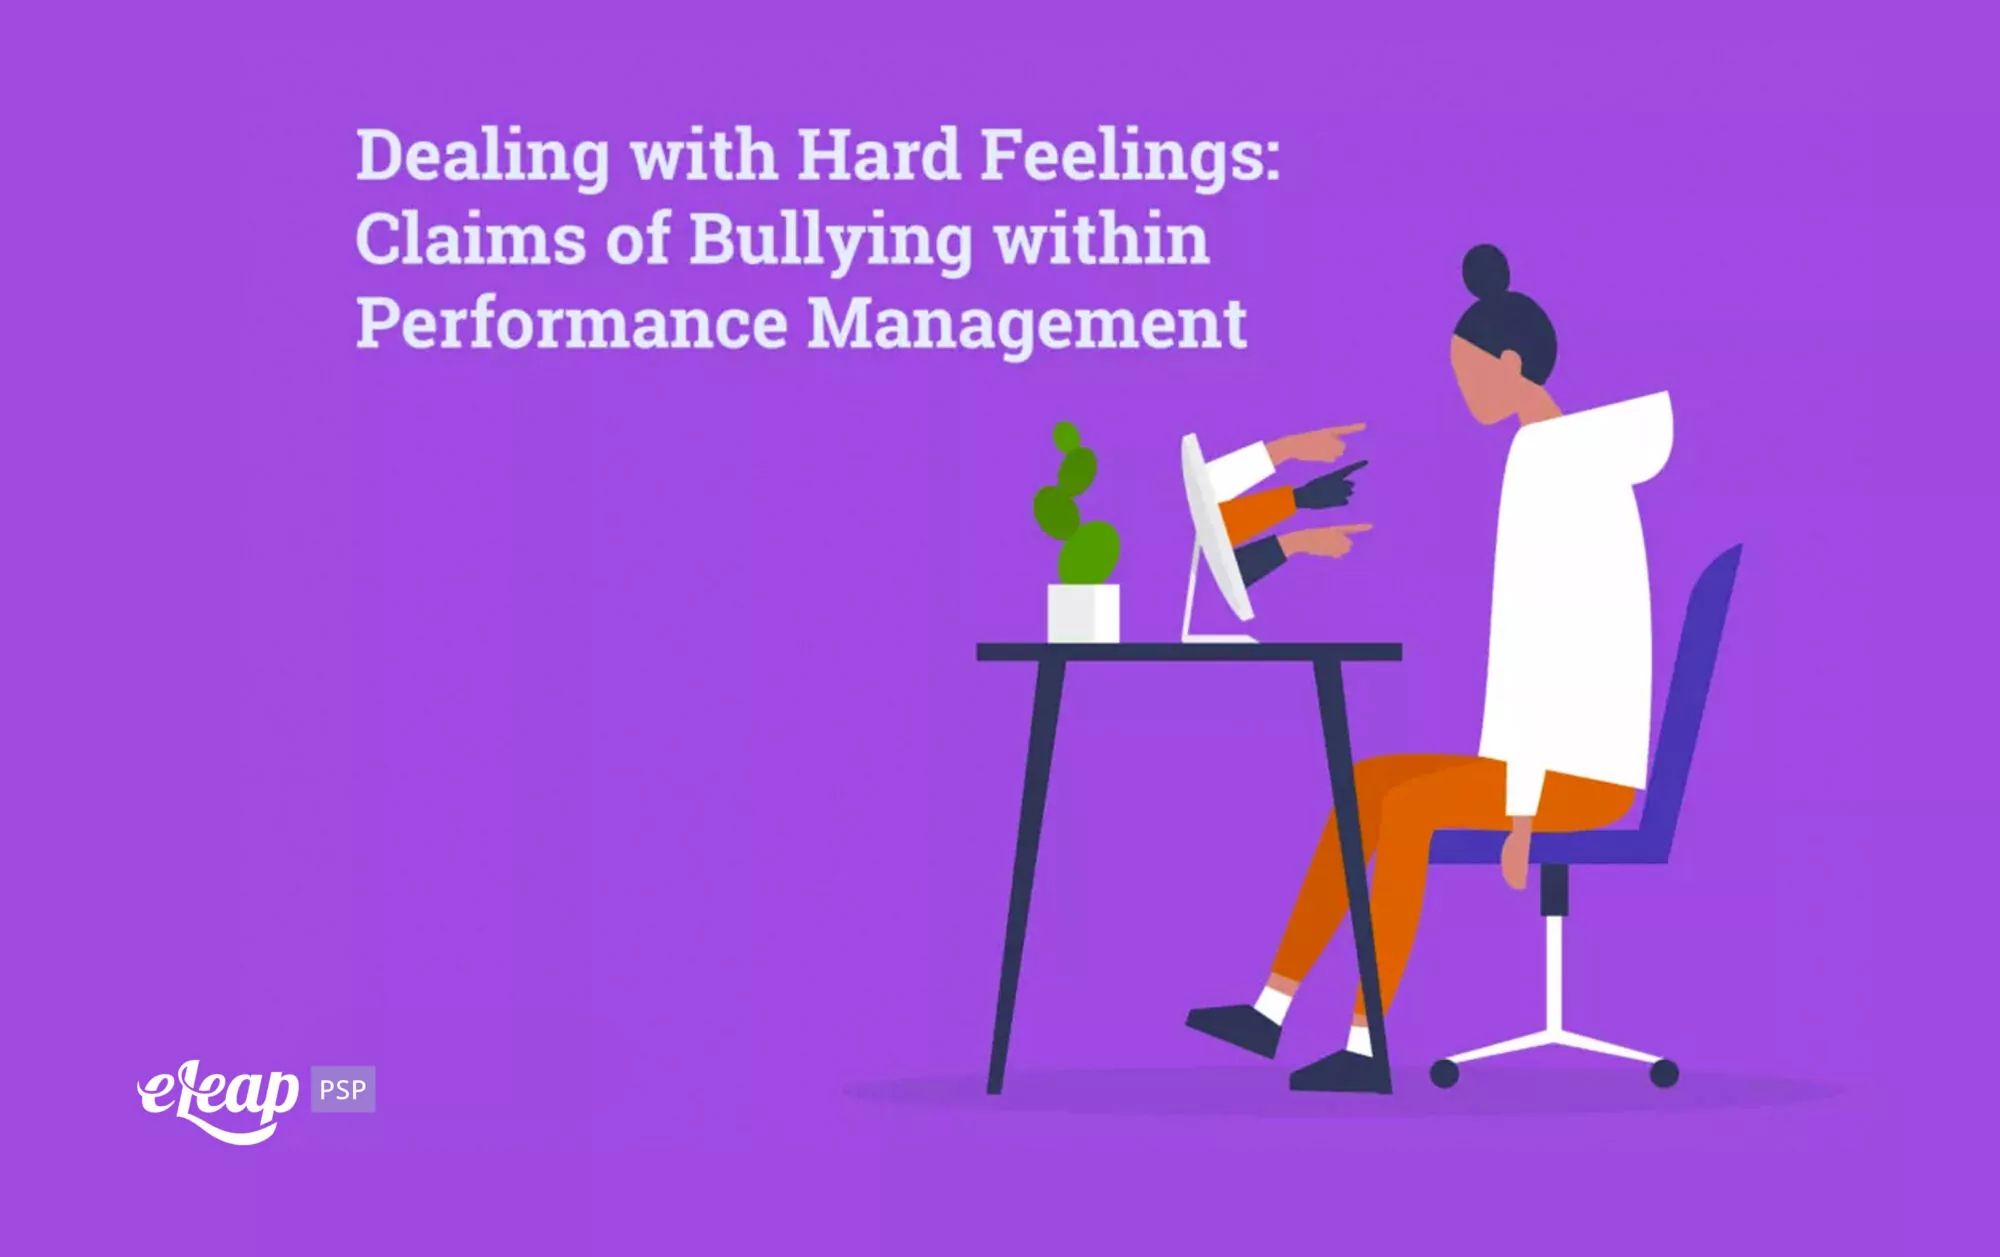 Bullying in Performance Management